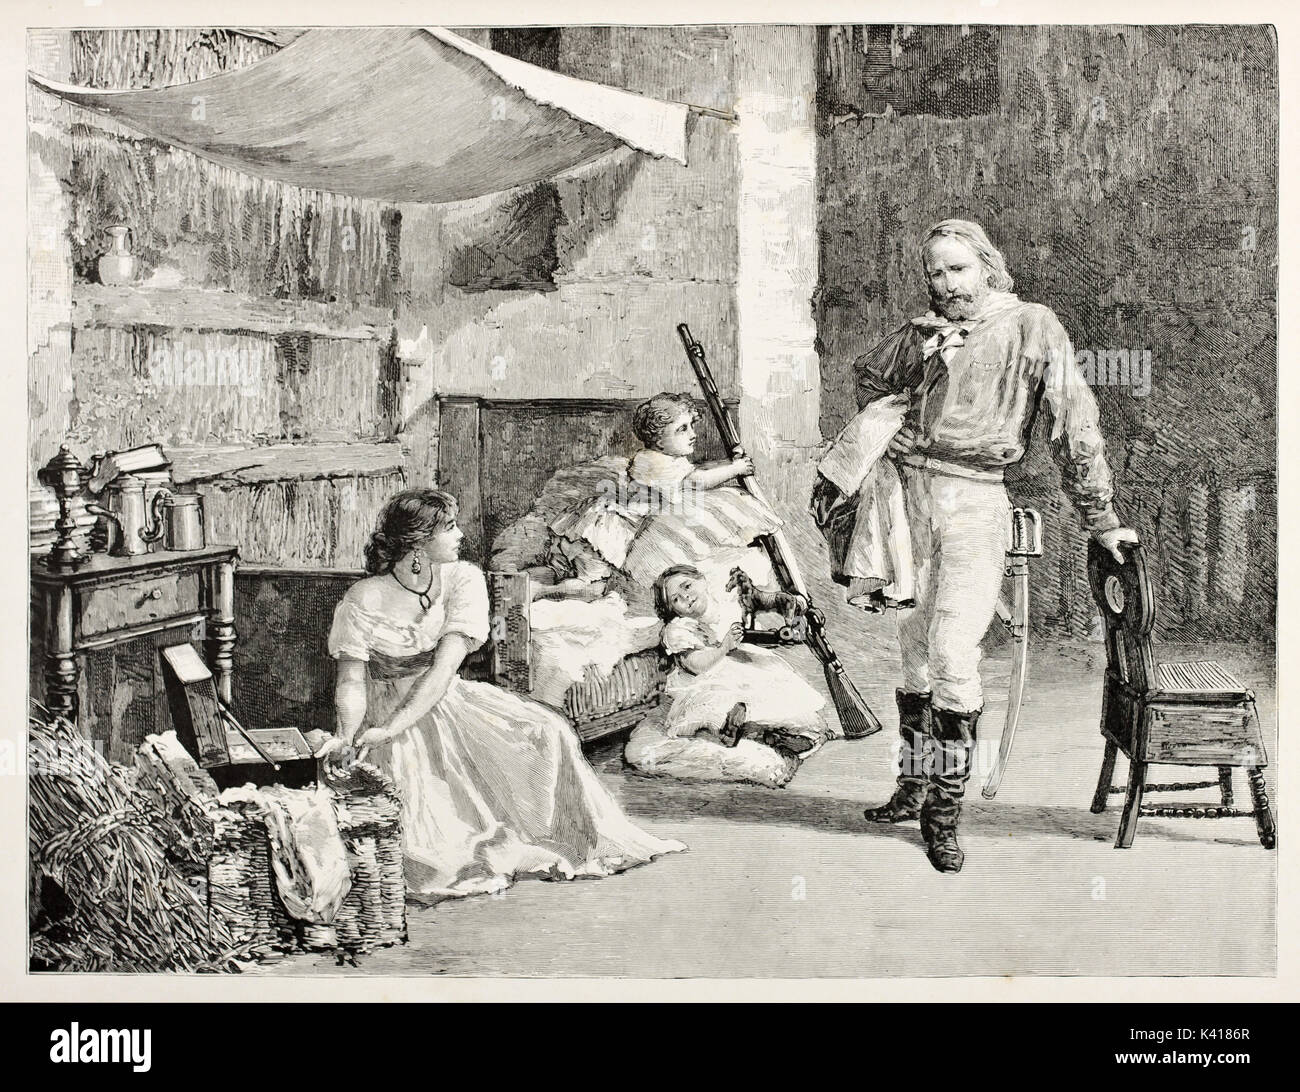 Giuseppe Garibaldi with his family in their home. Children are on the bed playing while his wife is seated. By E. Matania published on Garibaldi e i Suoi Tempi Milan Italy1884Garibaldi family Stock Photo